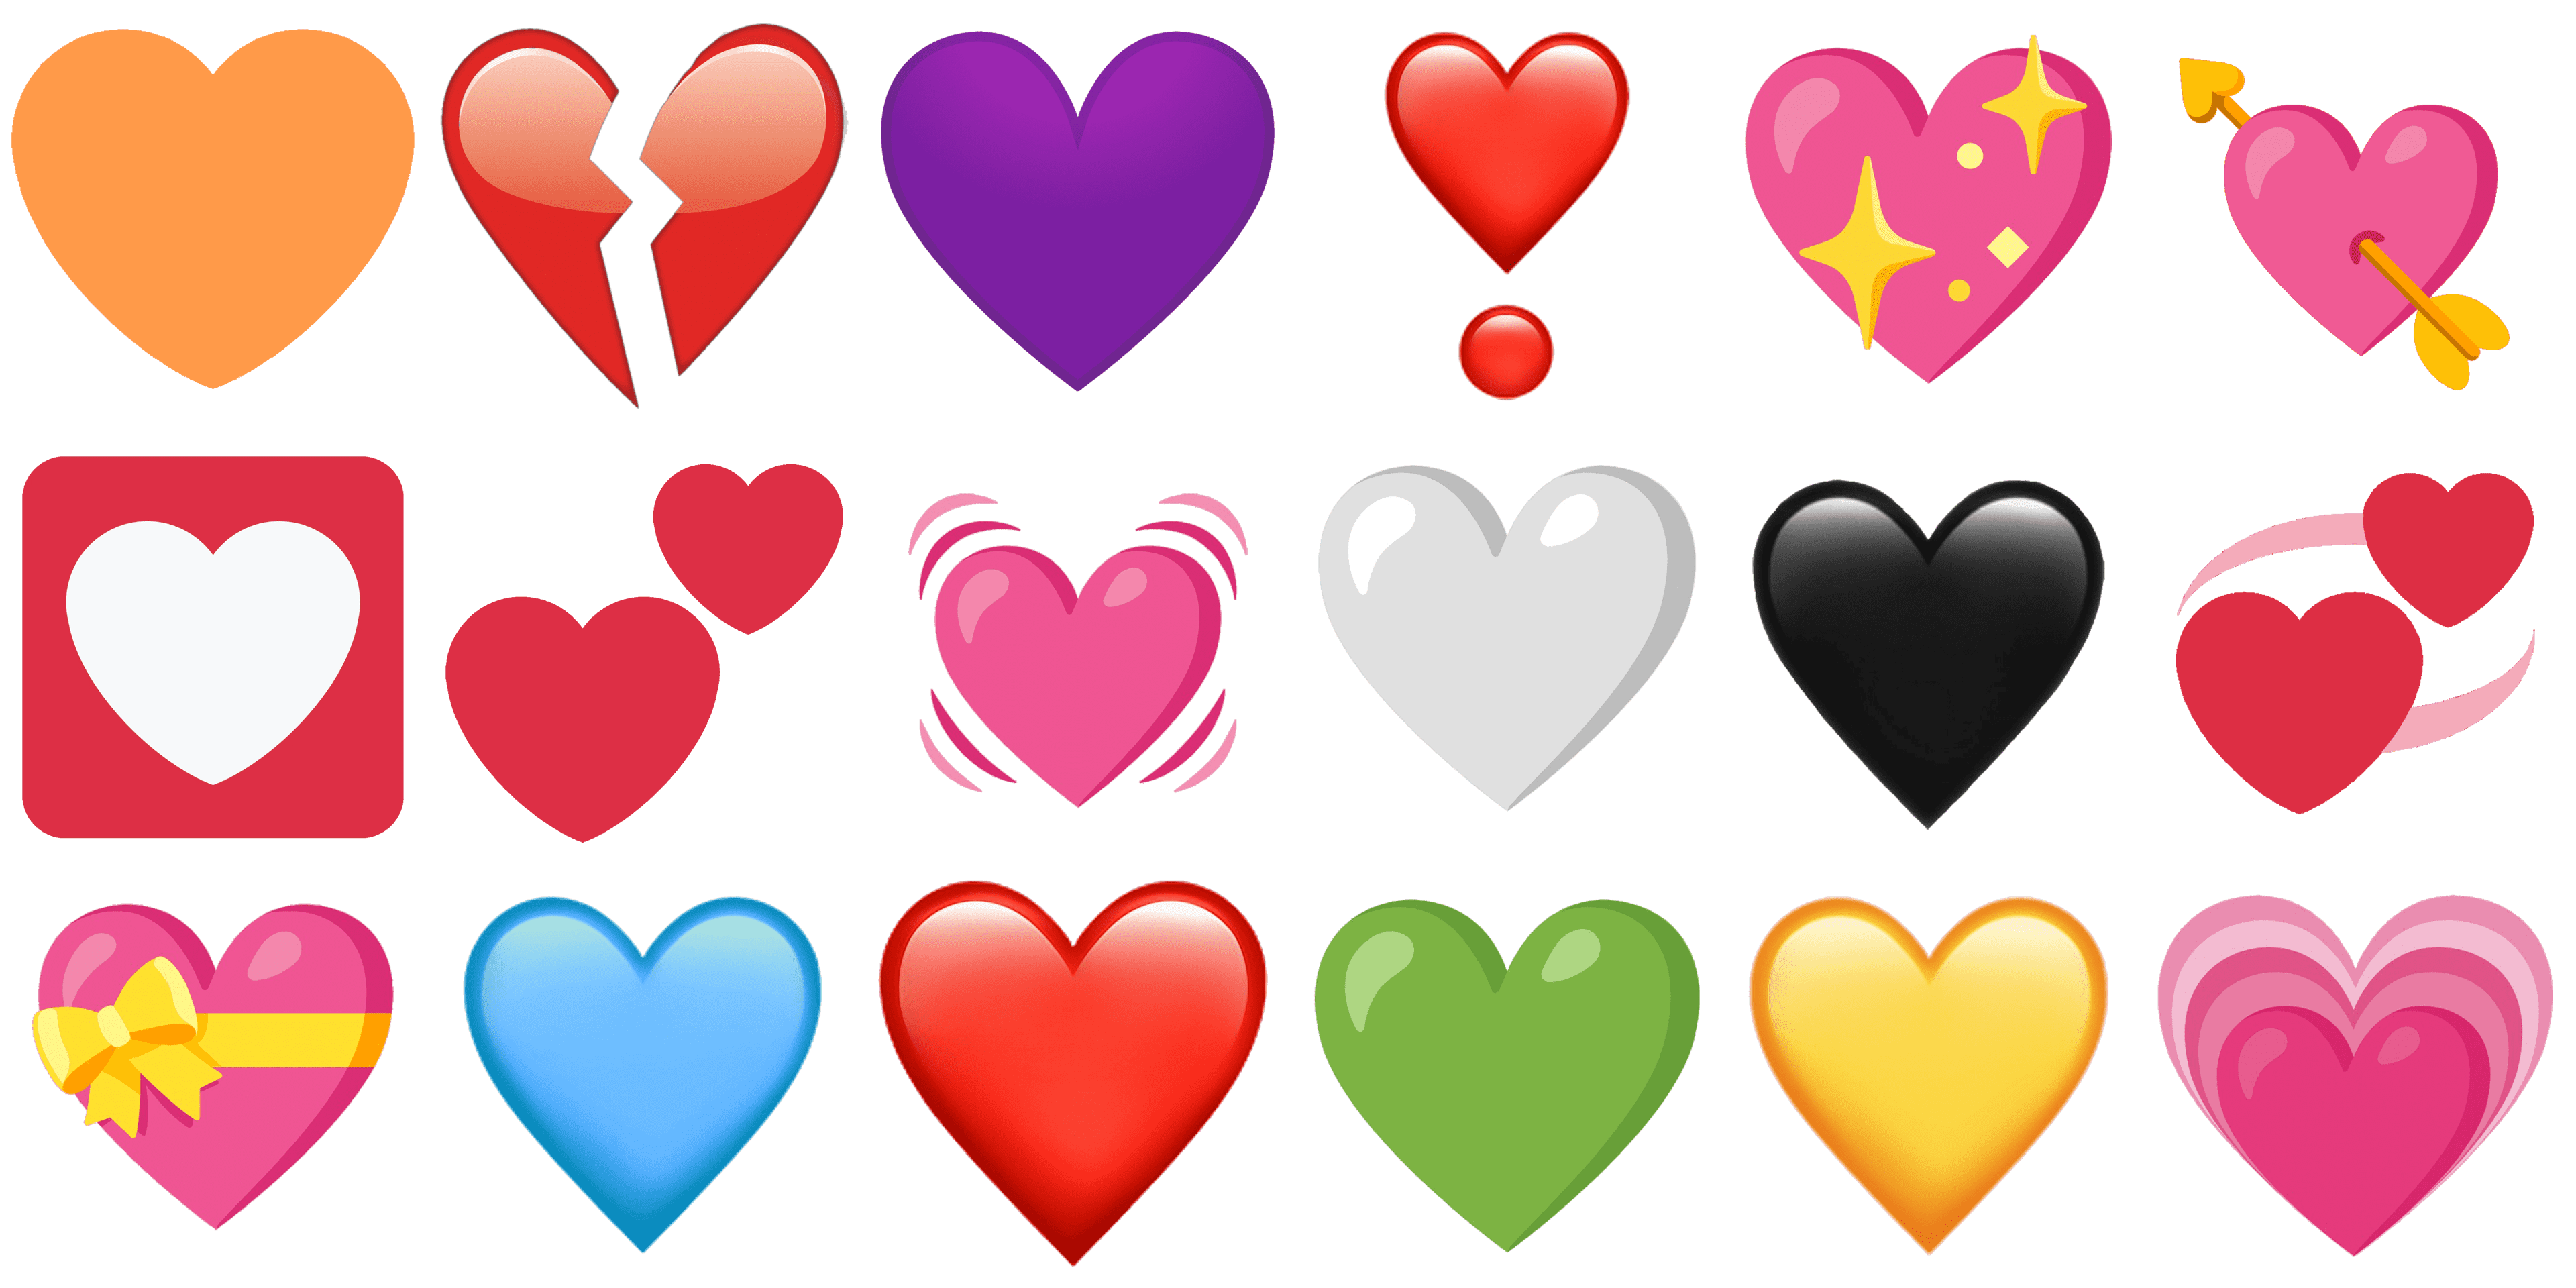 The Complete Guide for Heart Emoji Meanings